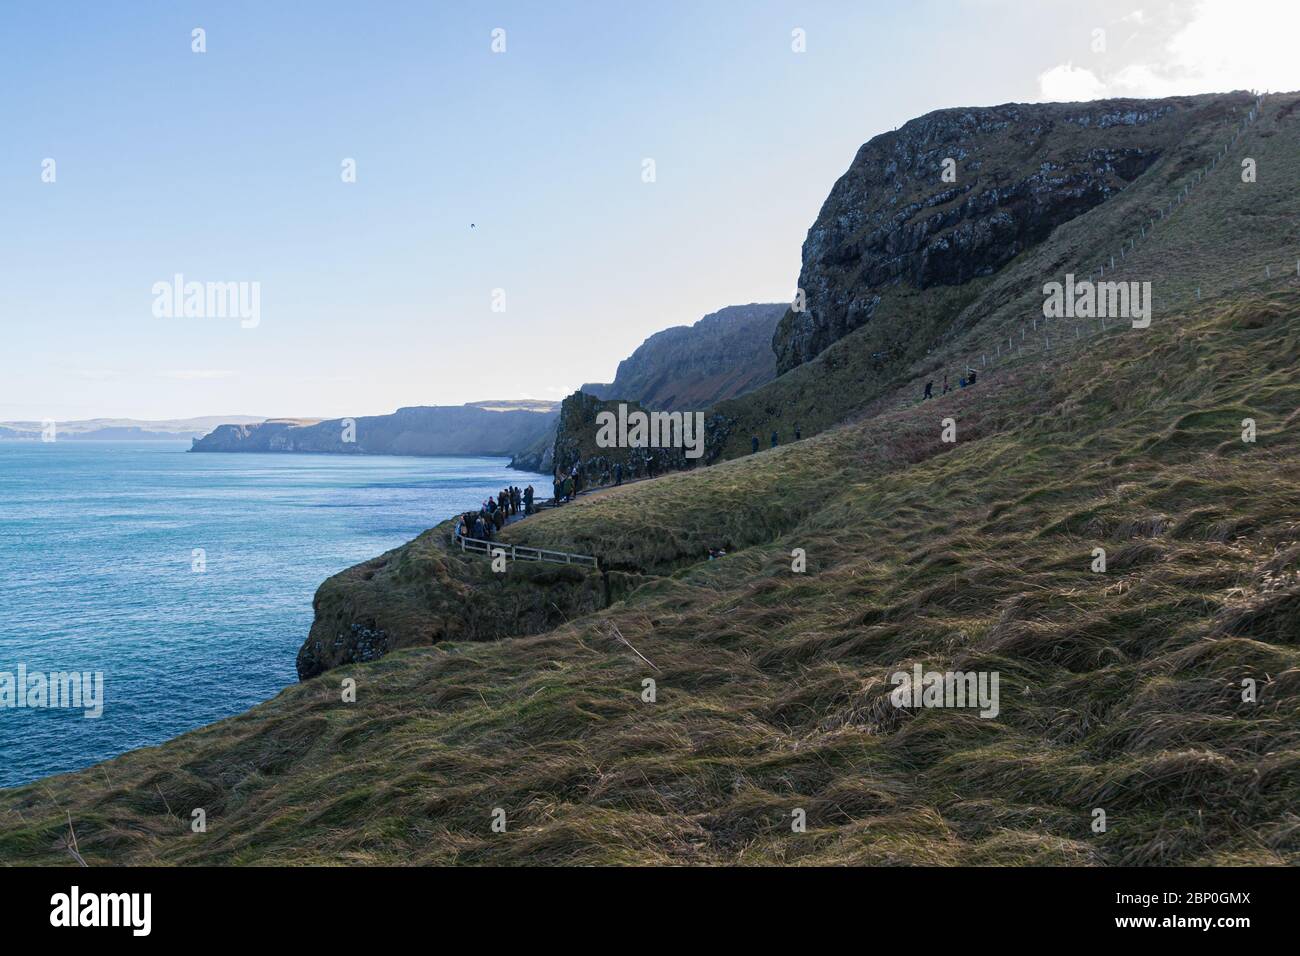 The White Cliffs Of Carrick A Rede in Ballintoy, Co. Antrim, Northern Ireland. Scenic landscape. Sunny day. Part of the Causeway Coastal Route. Stock Photo